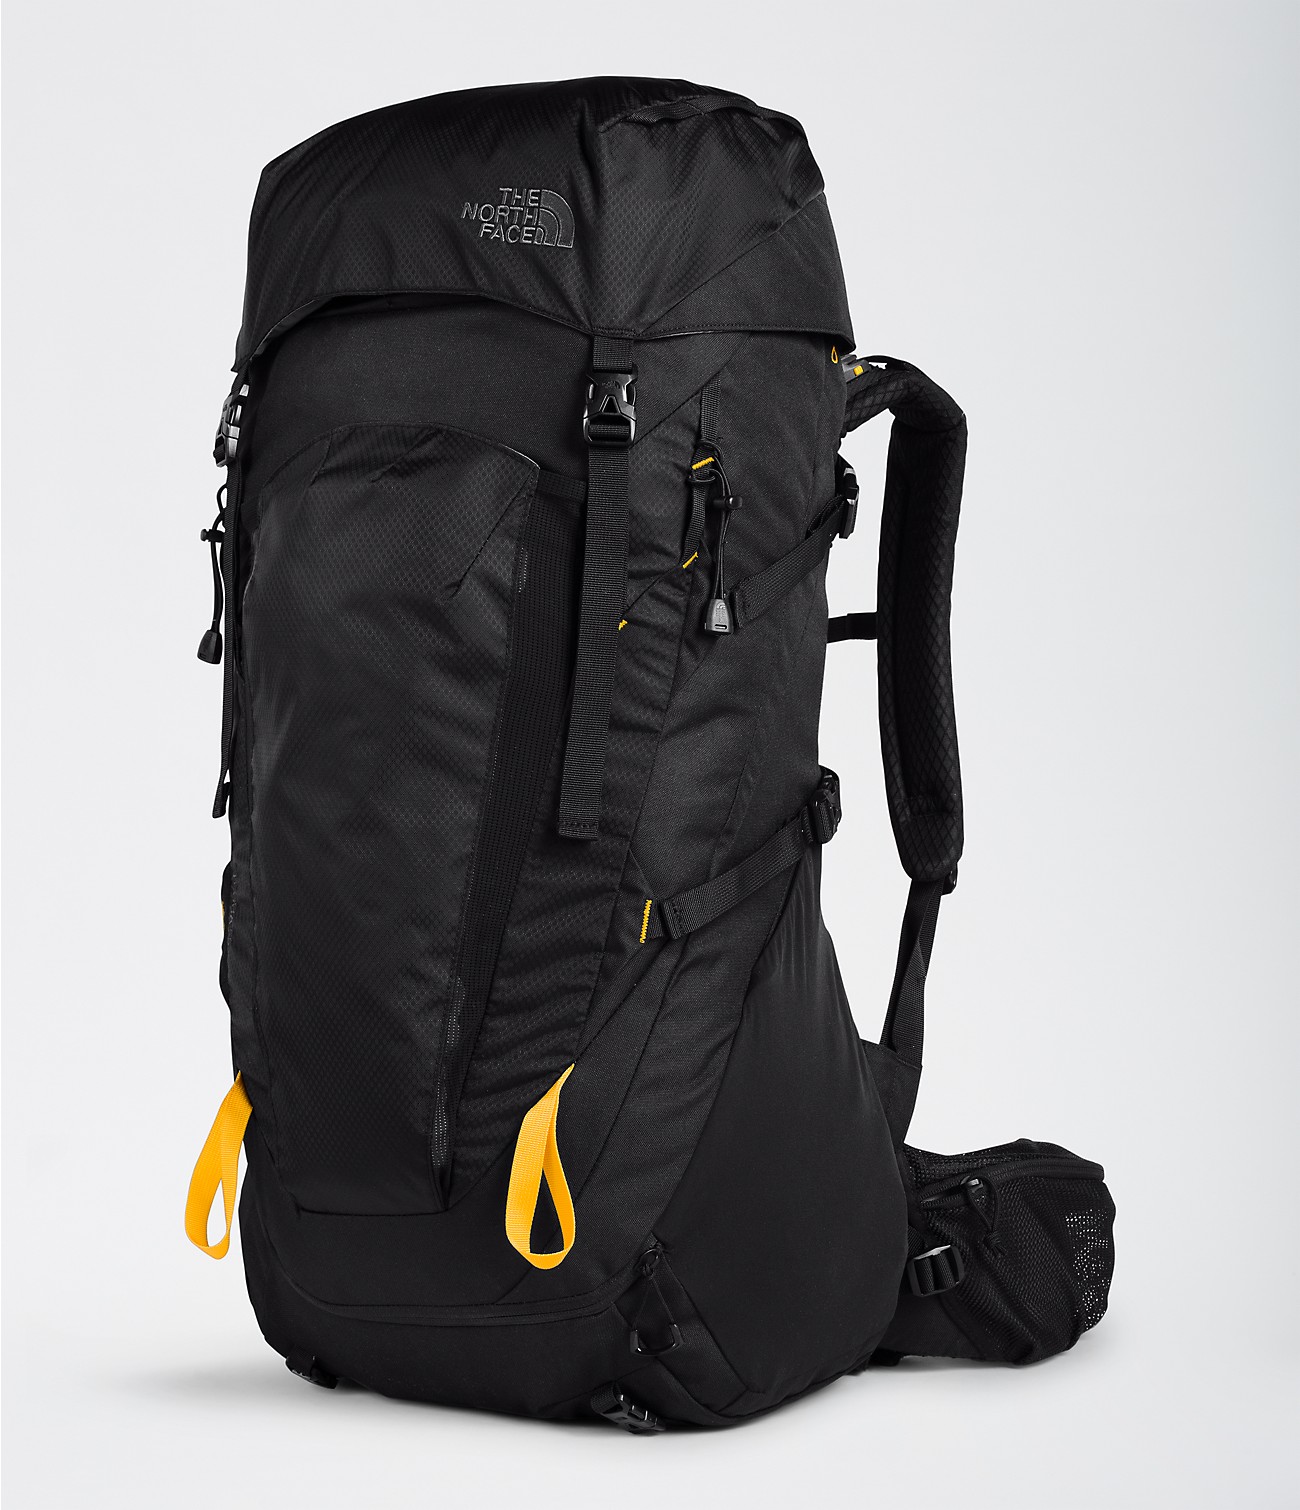 Unlock Wilderness' choice in the Osprey Vs North Face comparison, the Terra 55 Backpack by The North Face